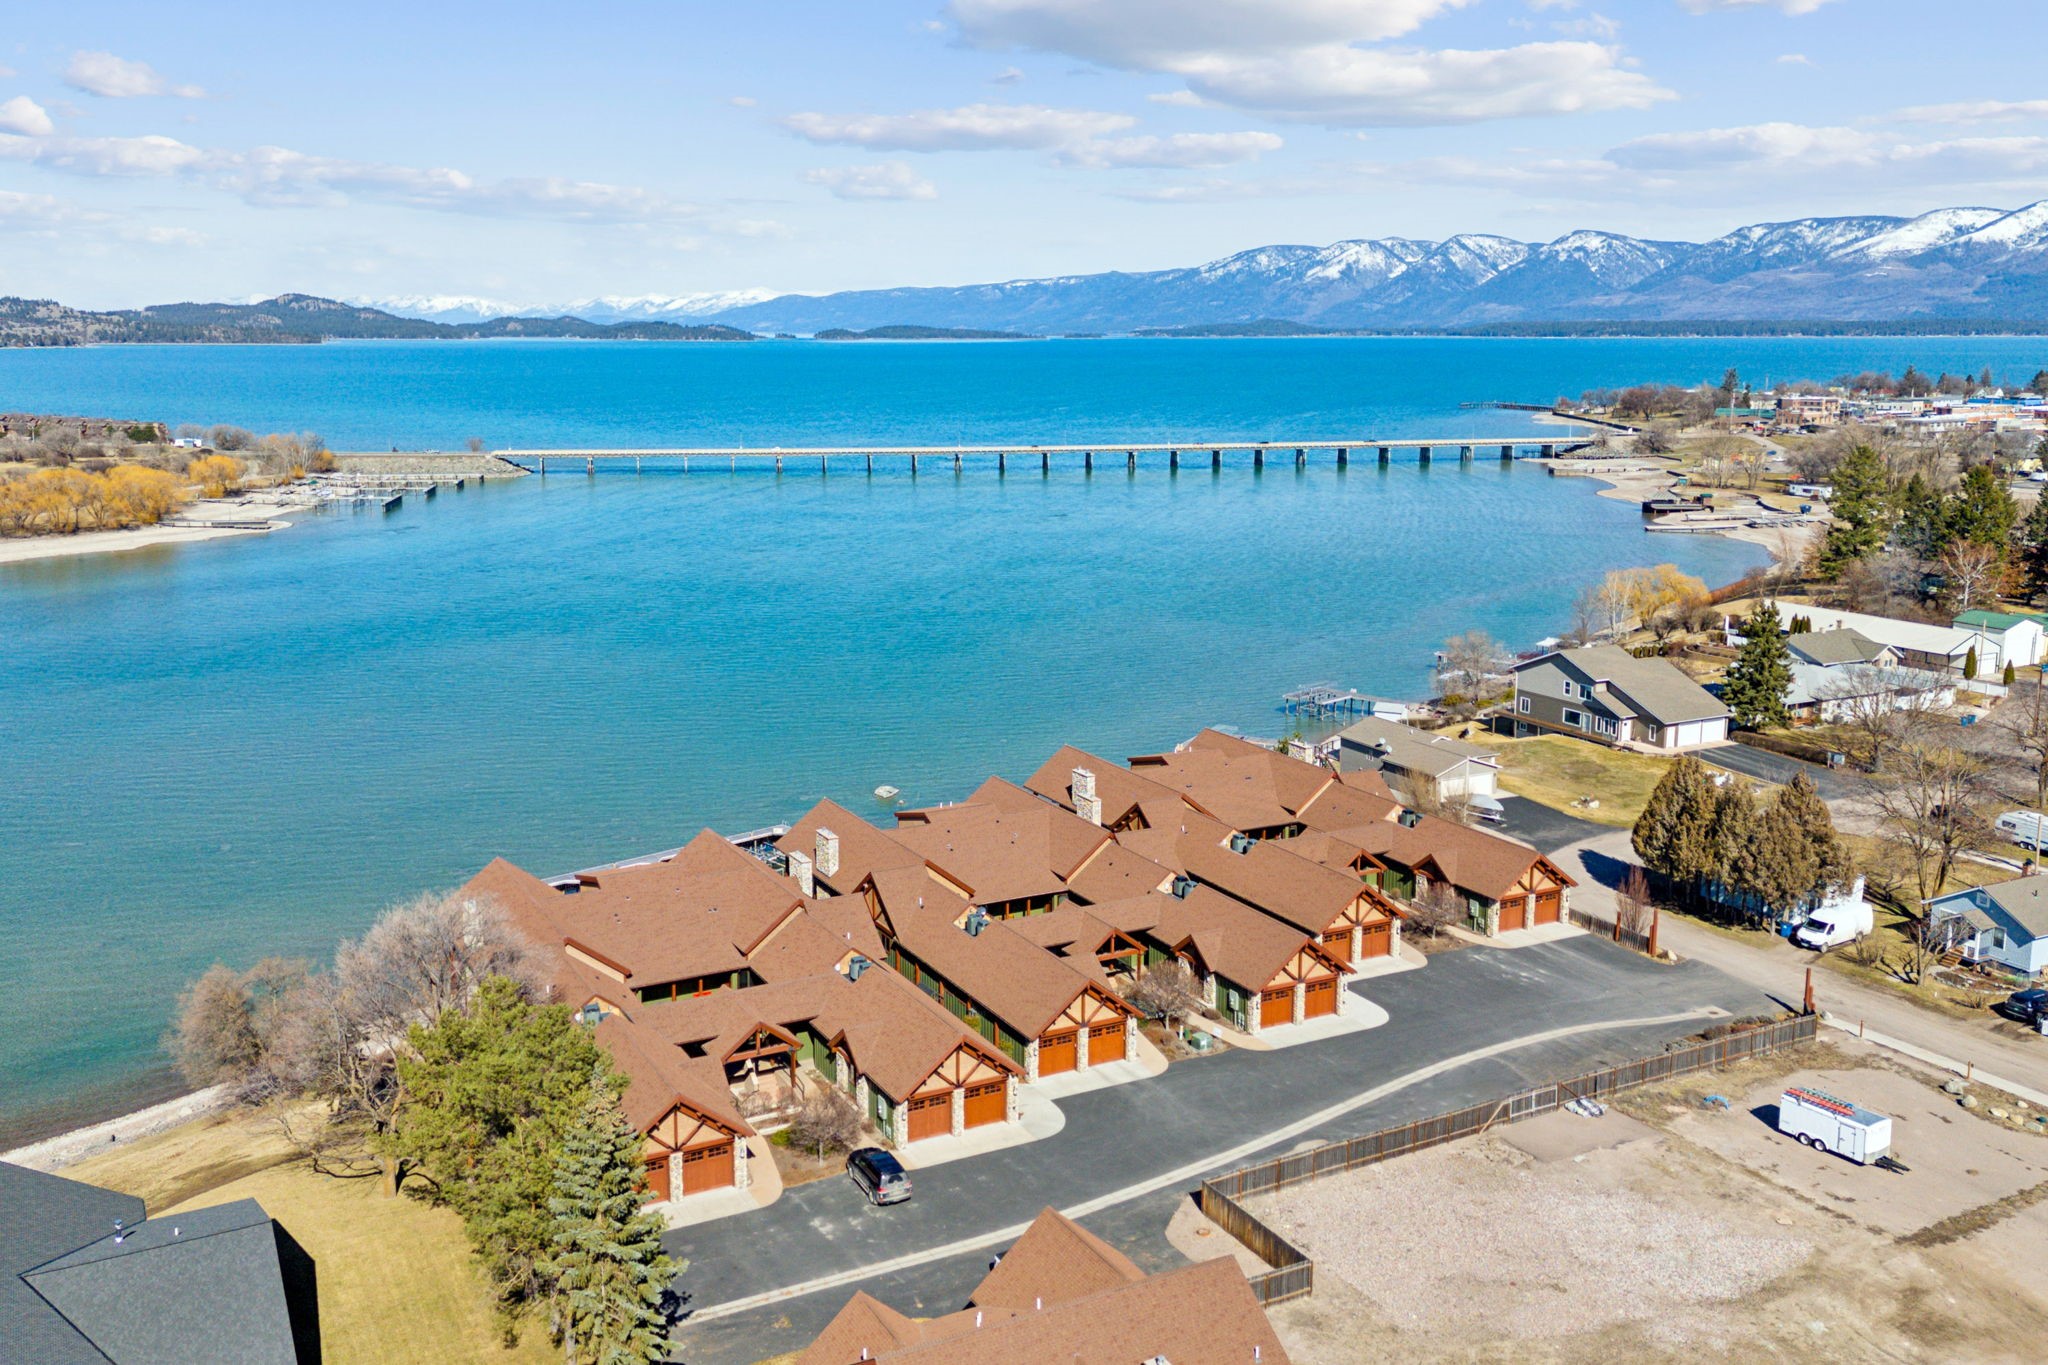 This Luxury upper level condo is a corner unit on the west side with gorgeous water and mountain views, high end finishes and a warm Montana feel. 
Featuring a chefs kitchen with Viking appliances, a river stone gas fireplace, vaulted ceilings, energy efficient features and so much more. 

On the main floor is the open living and dining area, 3 bedrooms each with their own ensuite. The master bedroom has direct access on to the covered deck. Upstairs is a beautiful penthouse room with half bathroom. Total living space is 2,928 Sq. Ft. This condo is offered with most of its furnishings included.

There is a deeded boat slip/dock with lift included, detached two car garage and additional on site parking for RVs, Boat trailers and more. 

River Landing condos are amongst the finest on Flathead Lake/River and also offer turn key, lock and leave benefits. 

For more information or to schedule a showing, contact Dalon Pobran at 406-396-0780 or your real estate professional.